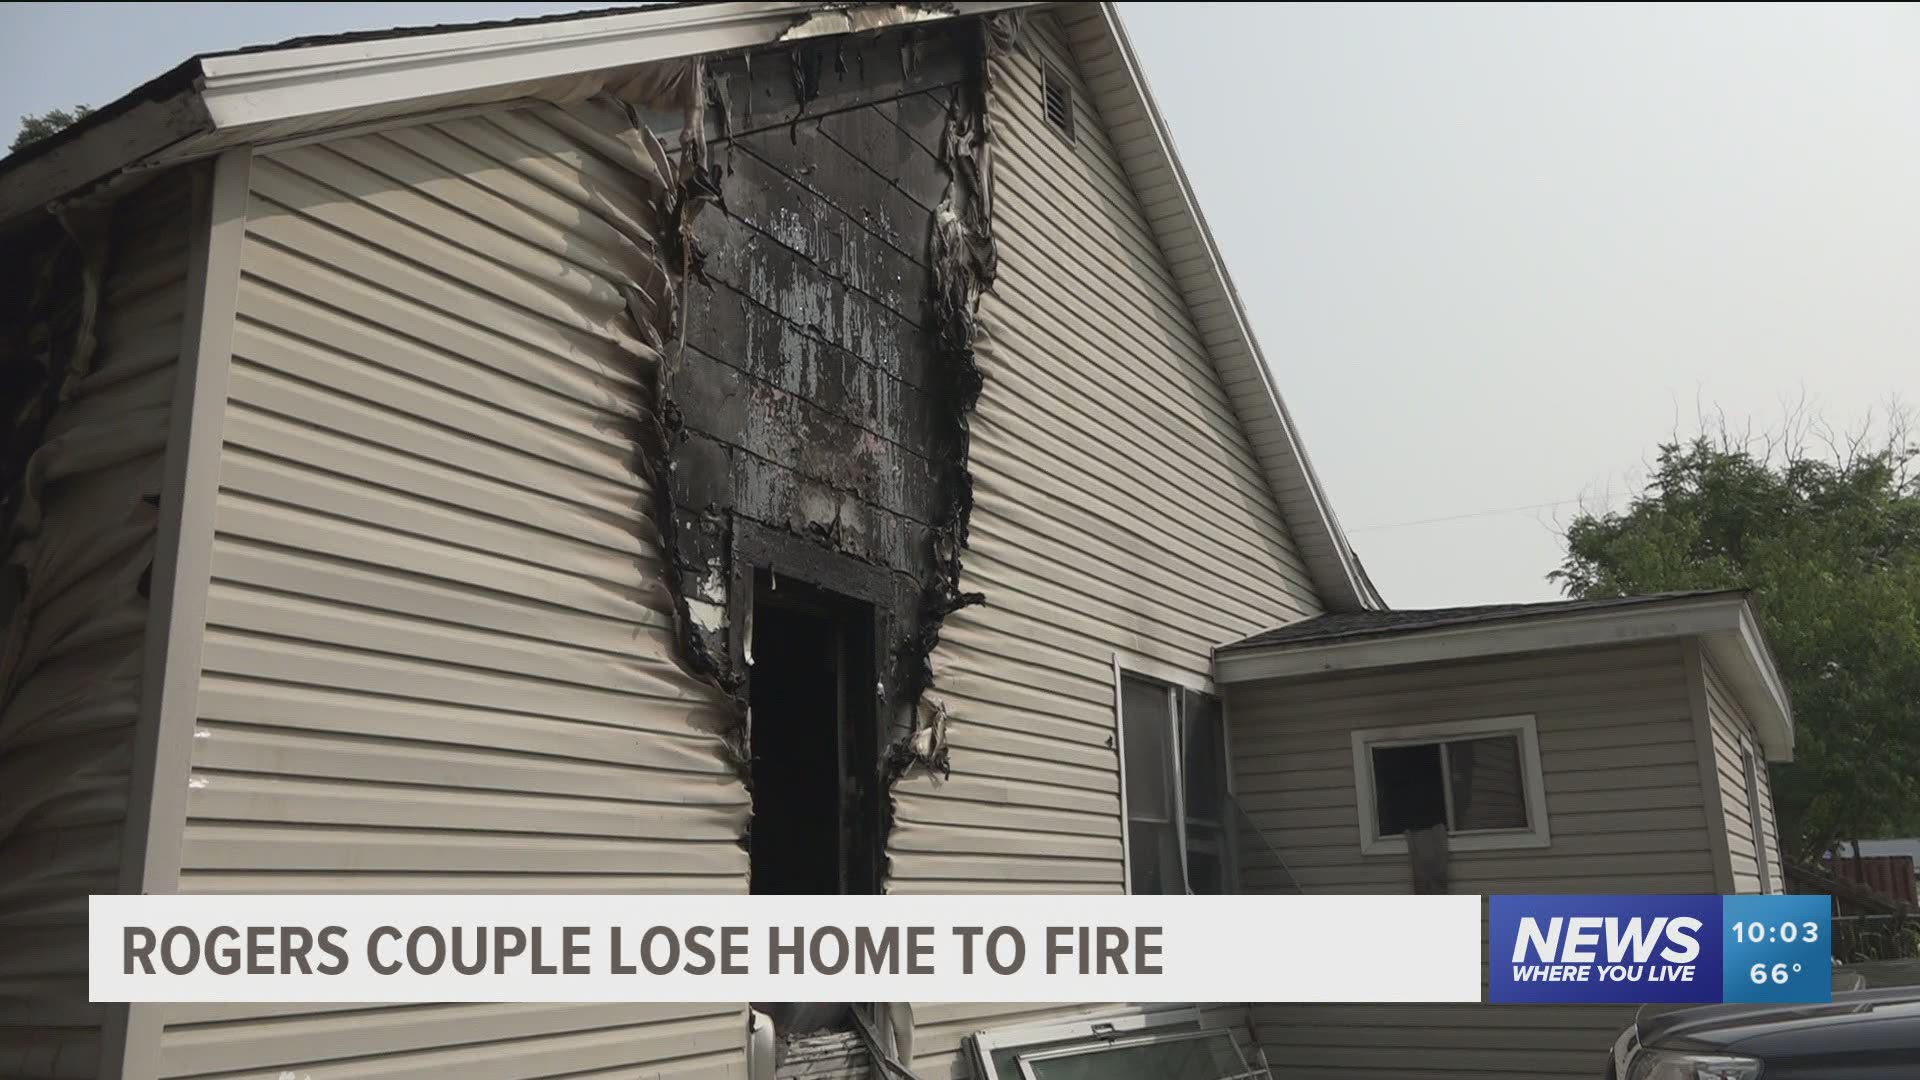 Rogers couple lose home to fire